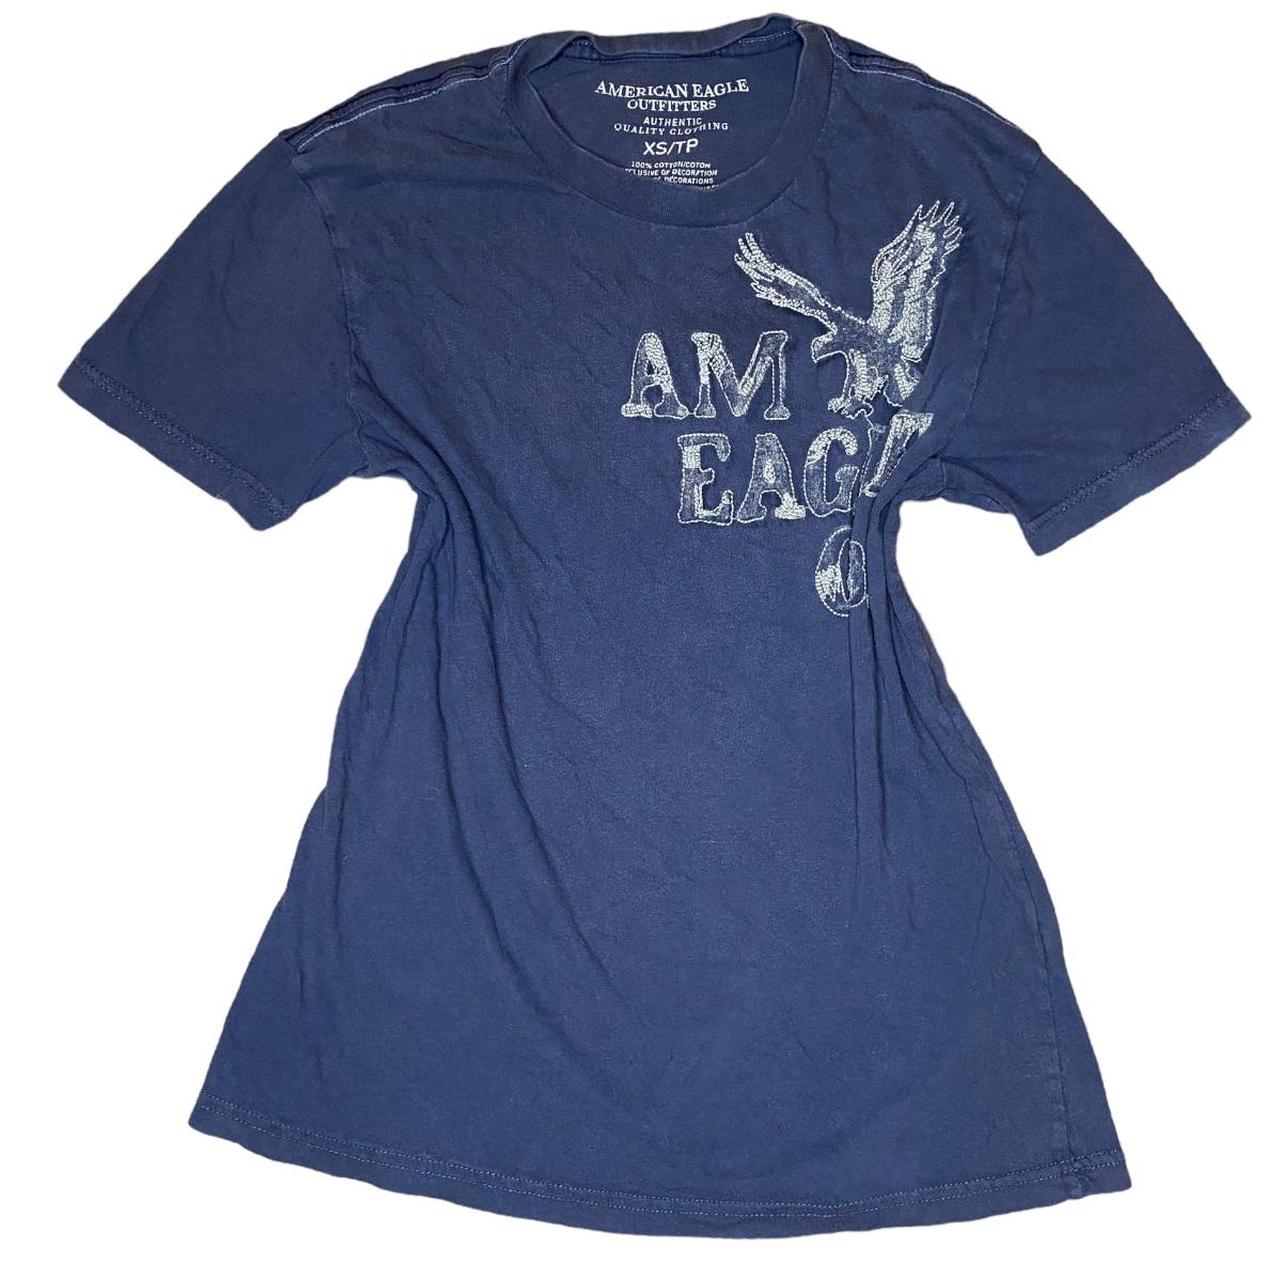 American Eagle Outfitters Women's T-Shirt - Navy - XS